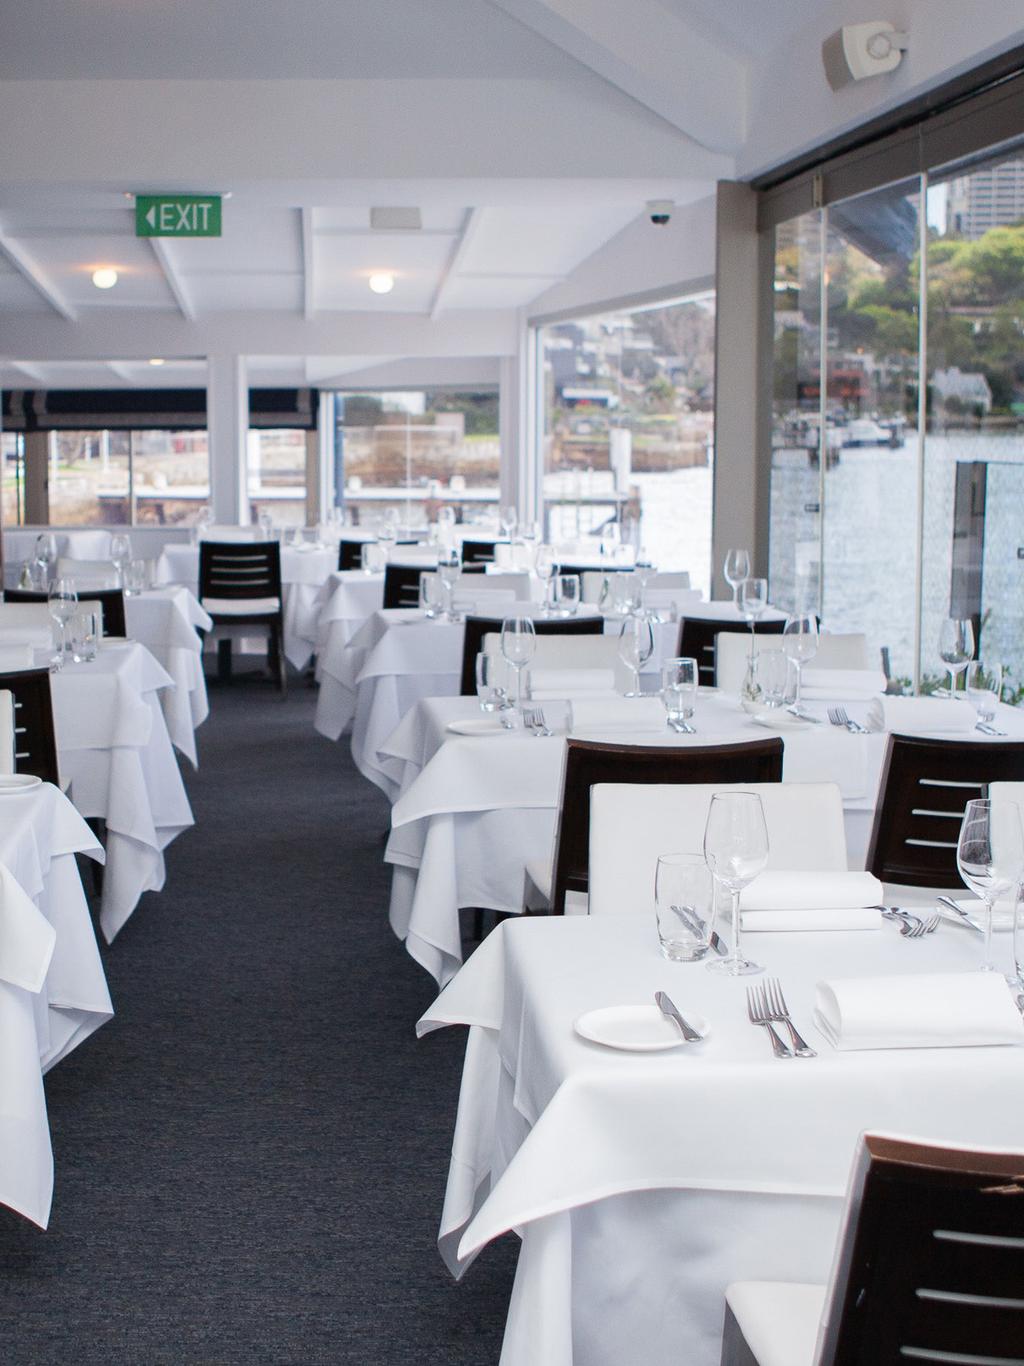 WELCOME Thank you for enquiring about Sails on Lavender Bay for your upcoming event. We offer superb, modern Australian food, professional service and an extensive wine list for your function.